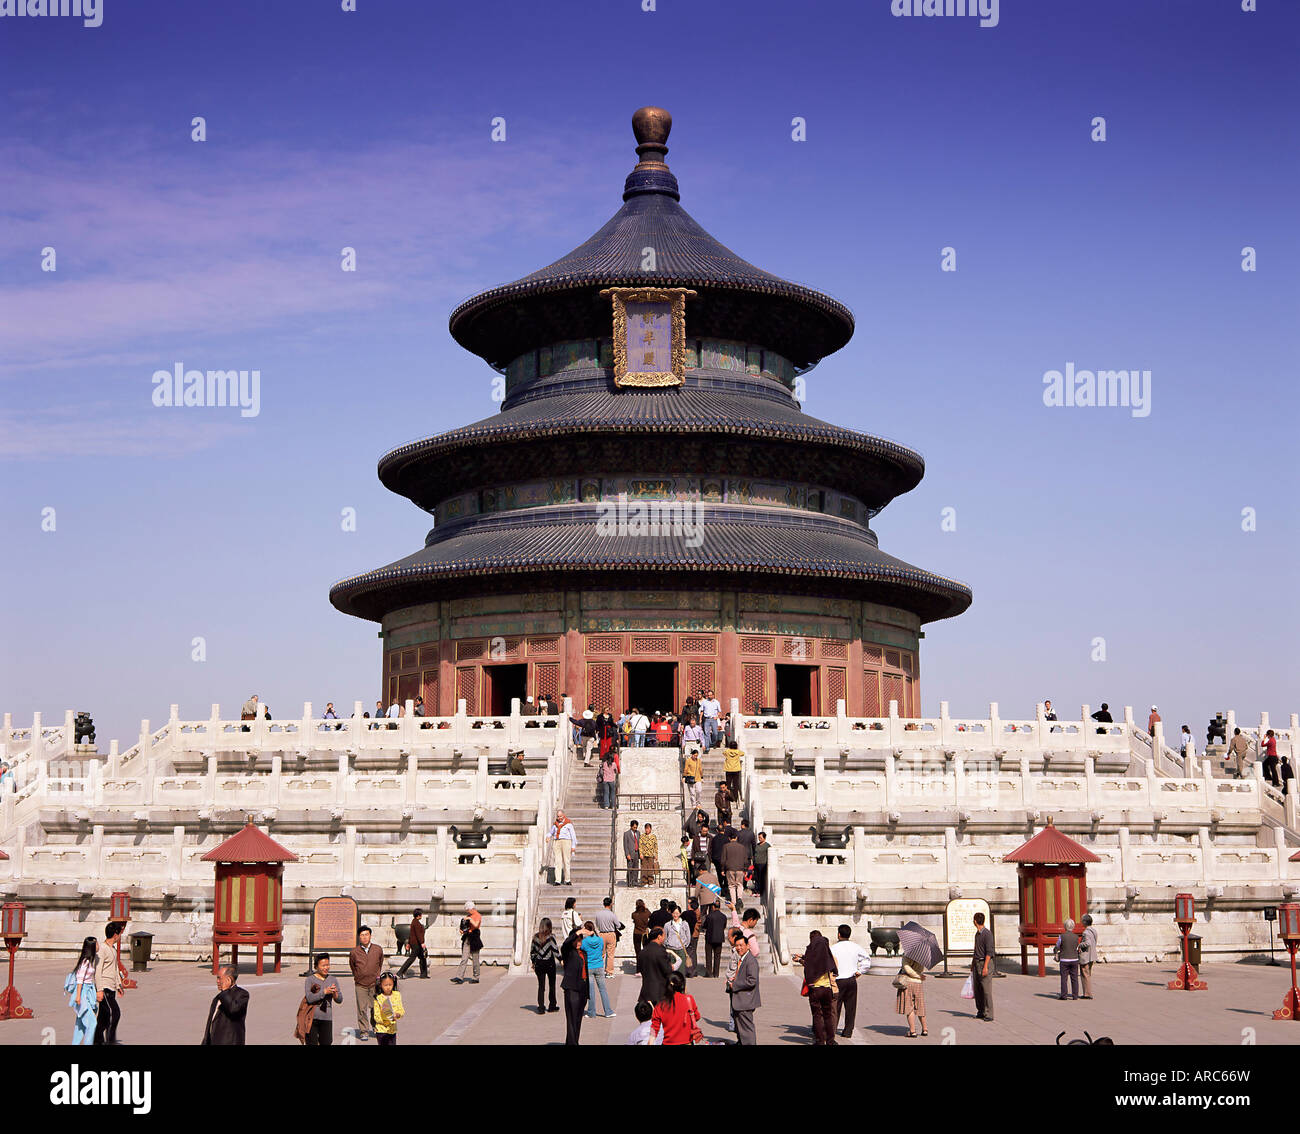 The Hall of Prayer for Good Harvests, Temple of Heaven, Tiantan Gongyuan, UNESCO World Heritage Site, Beijing, China, Asia Stock Photo